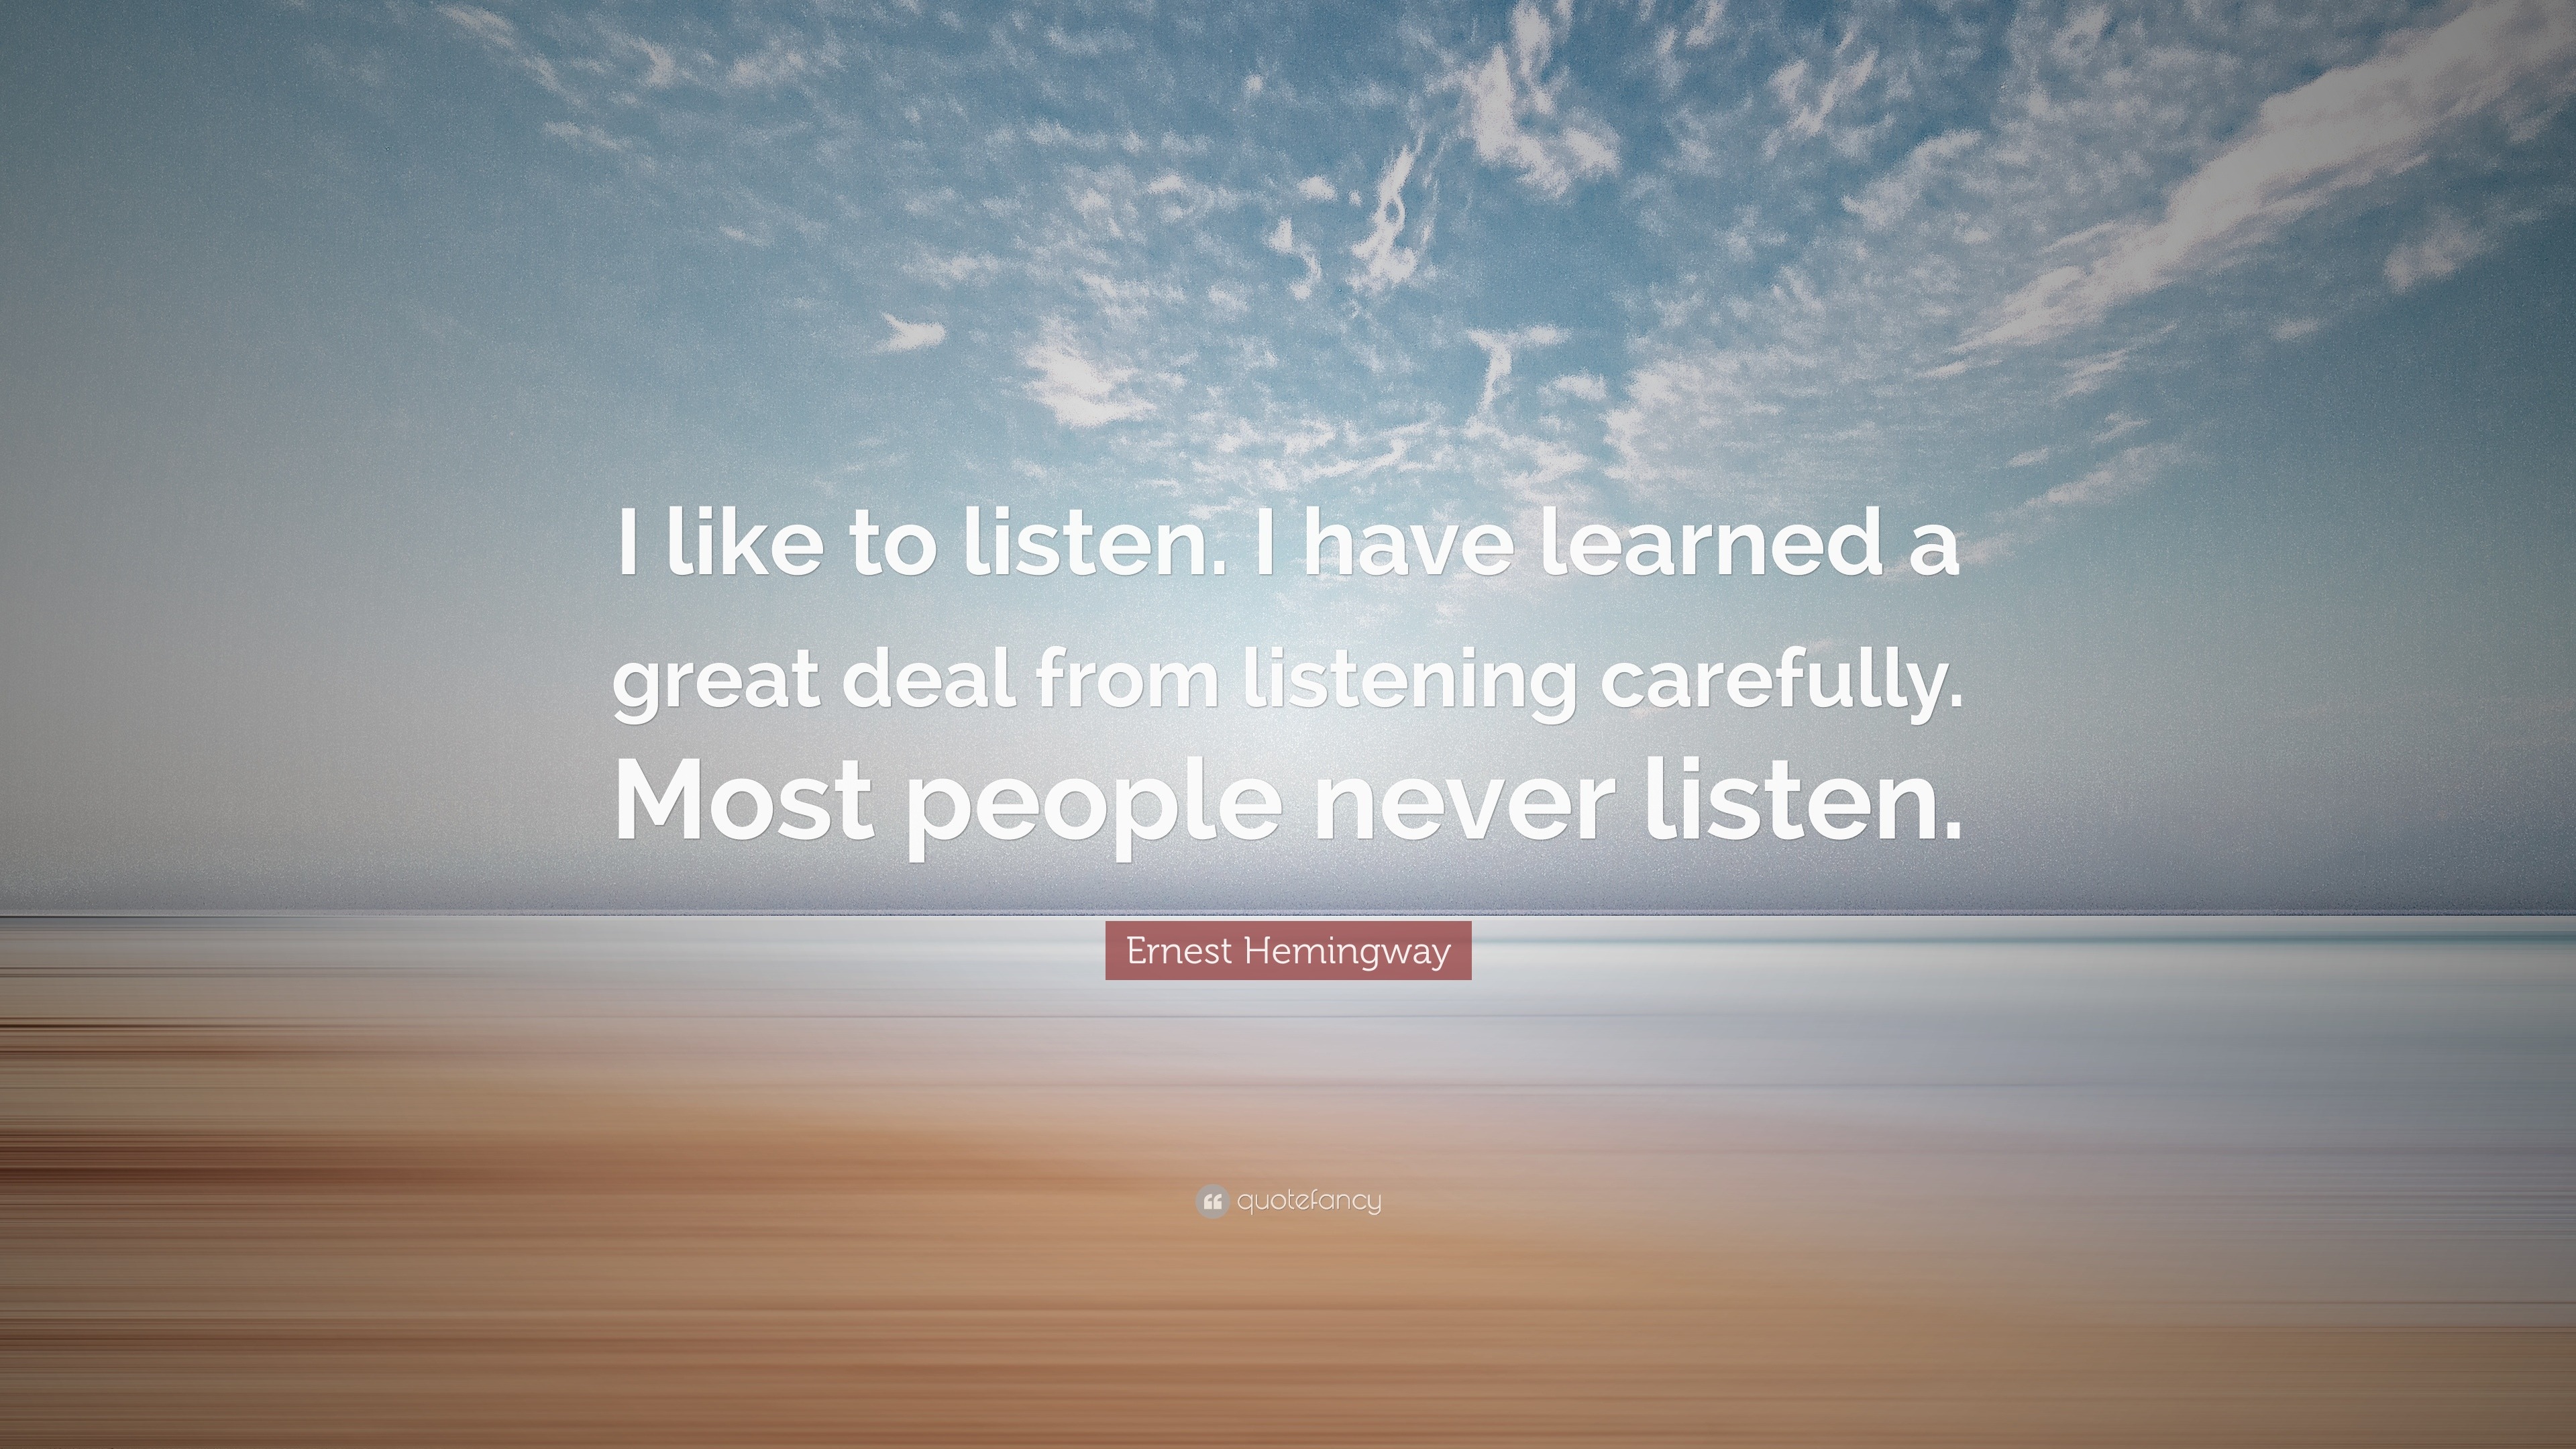 Ernest Hemingway Quote: “I like to listen. I have learned a great deal ...